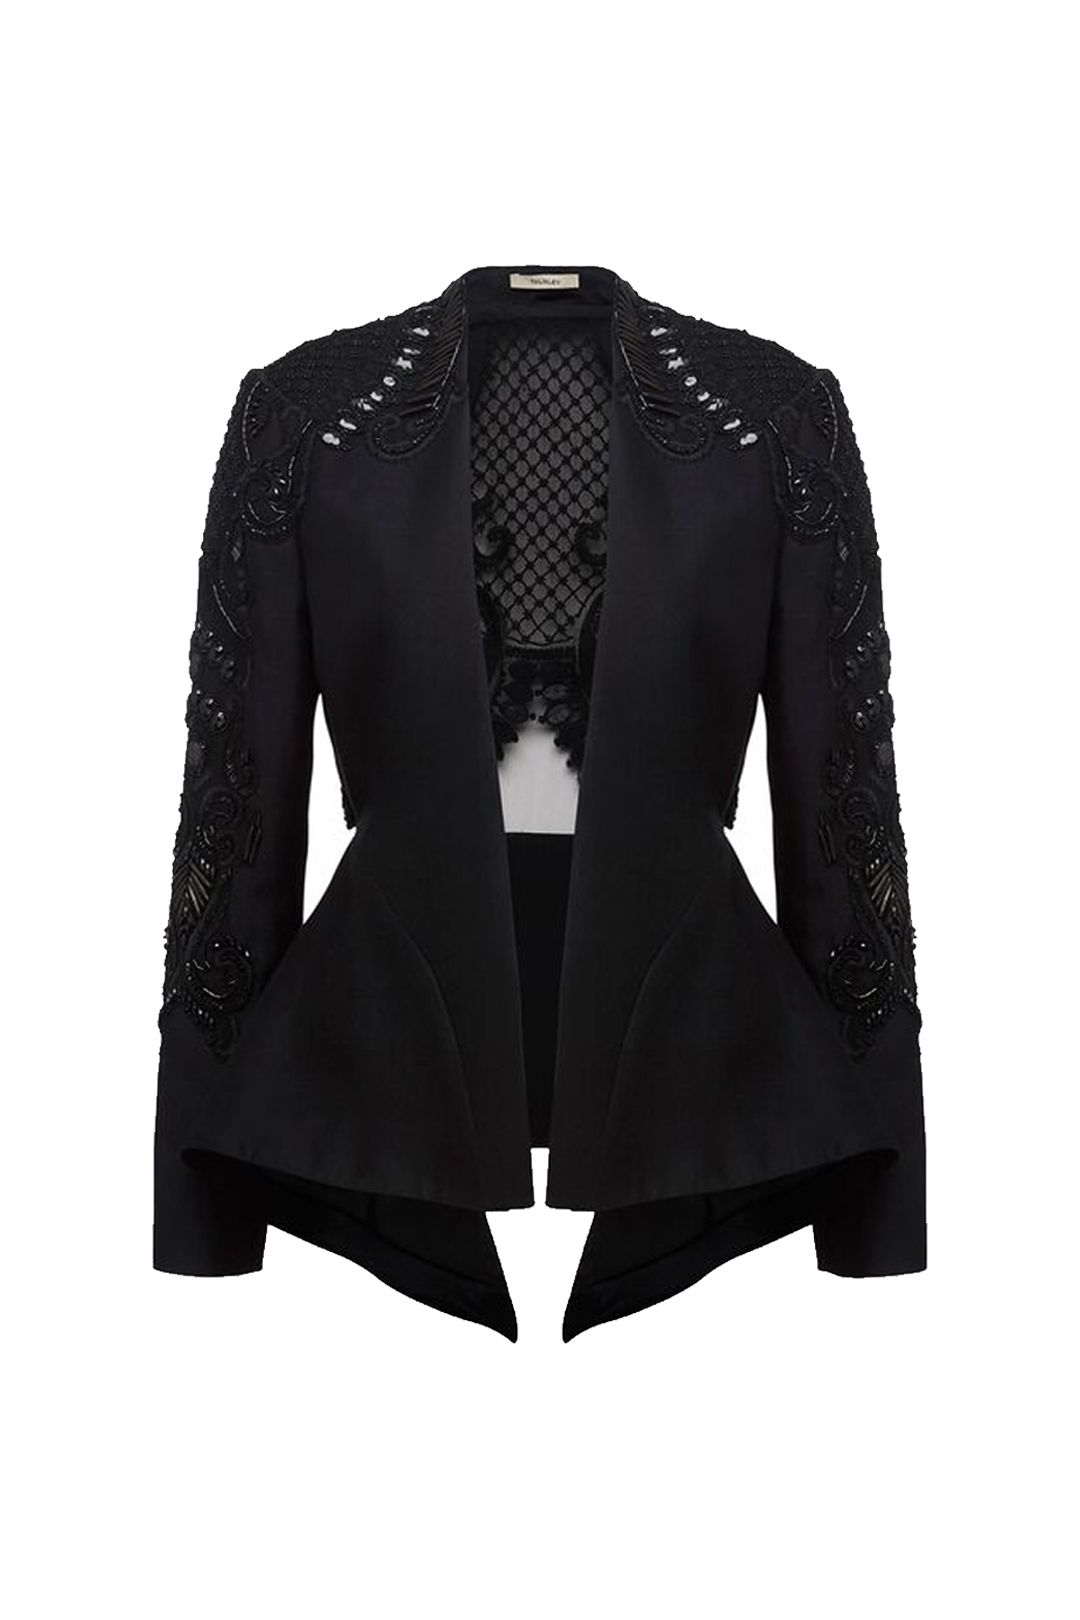 Thurley - Concerto Beaded Jacket - Black - Front